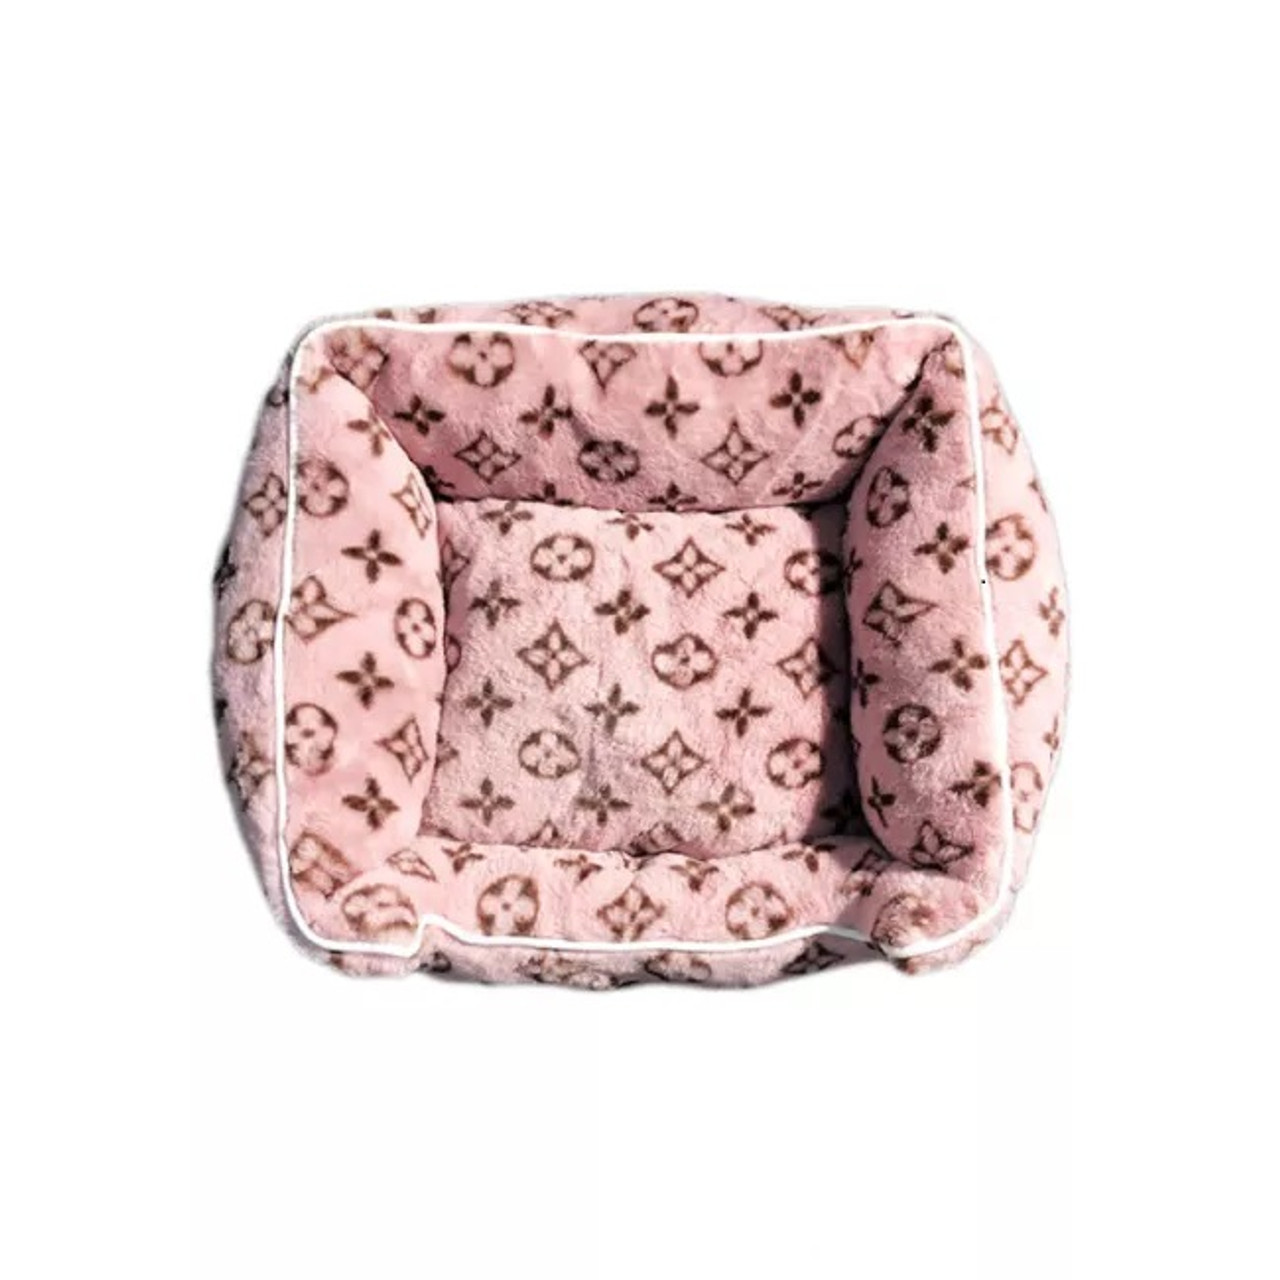 Pink Fluffy Chewy Vuitton Bed